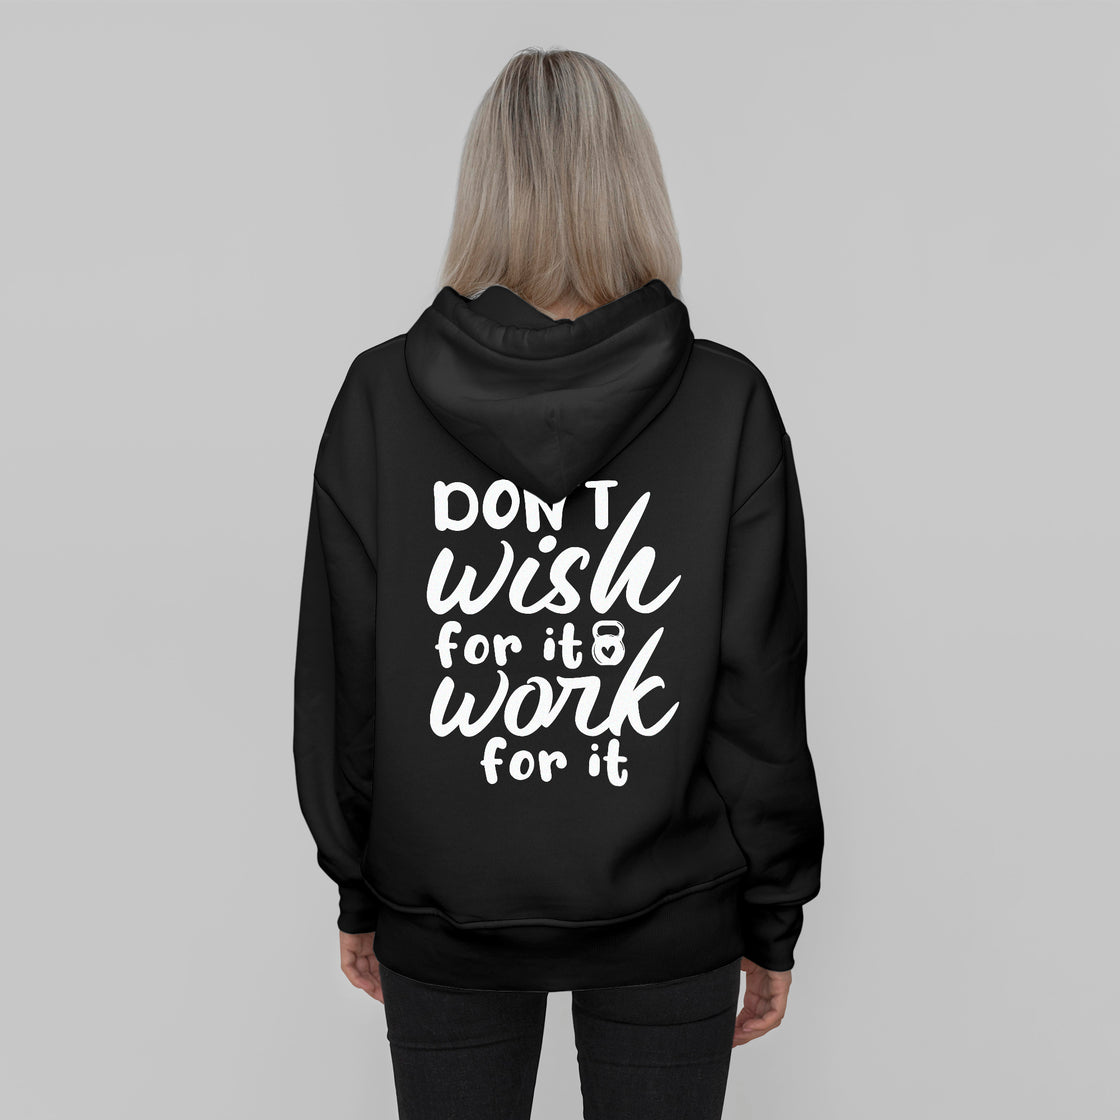 'Don't Wish for it Work for it' T-Shirt - Custom Gifts 